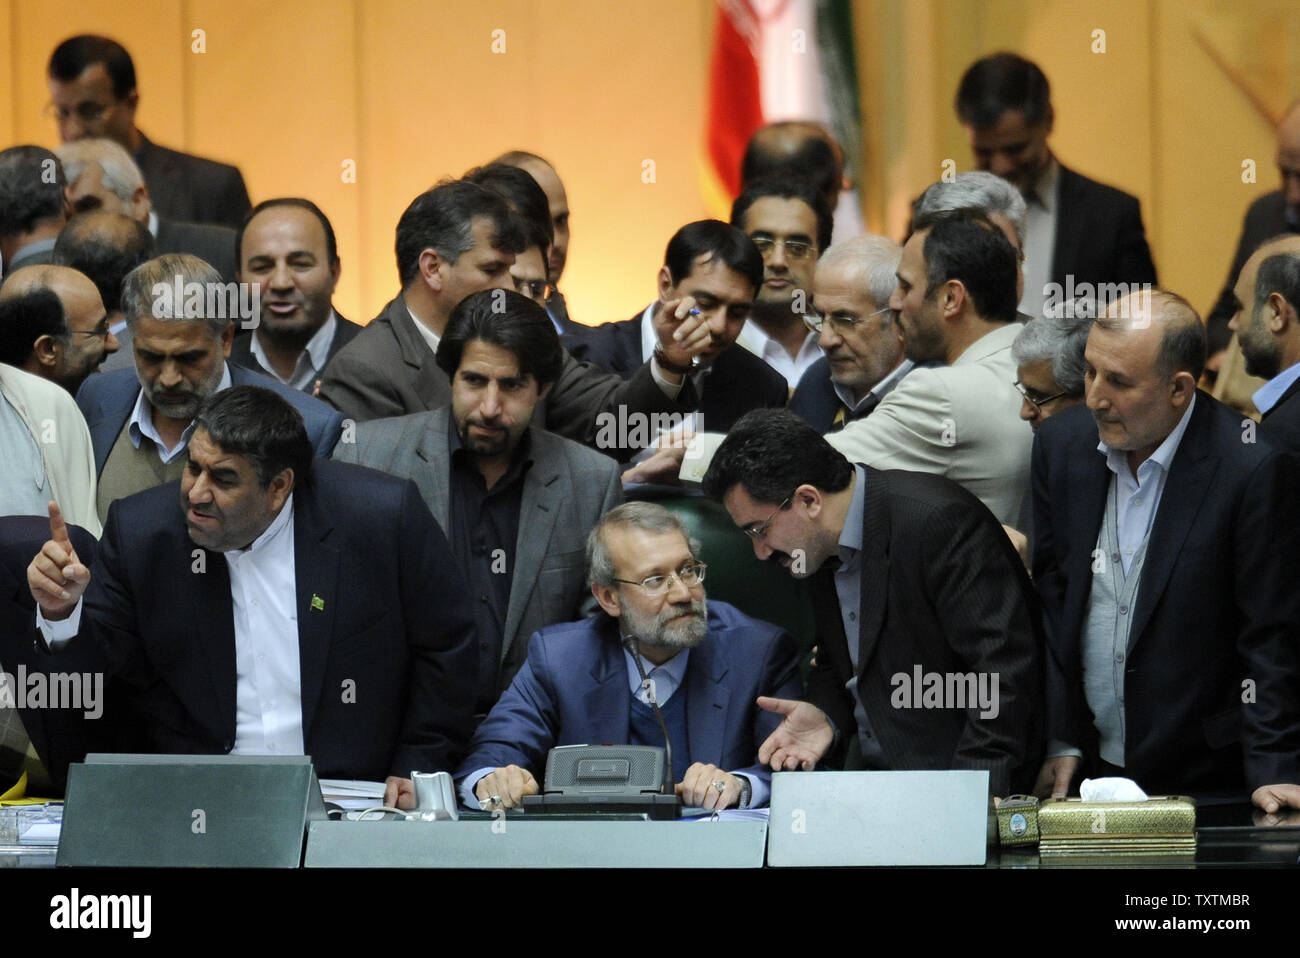 Iranian Parliamentary speaker Ali Larijani (C) is surrounded by MP's during the impeachment of the labor minister Abdolreza Sheikholeslami, unseen, at the parliament in Tehran, Iran on February 3, 2013. Out of 272 lawmakers in the parliament on Sunday, 192 voted against the labor minister. The main reason behind the MP's decision to dismiss the minister was Sheikholeslami's refusal  to remove former Tehran prosecutor general Saeed Mortazavi from his post as the director of the Social Security Organization.     UPI/Maryam Rahmanian Stock Photo